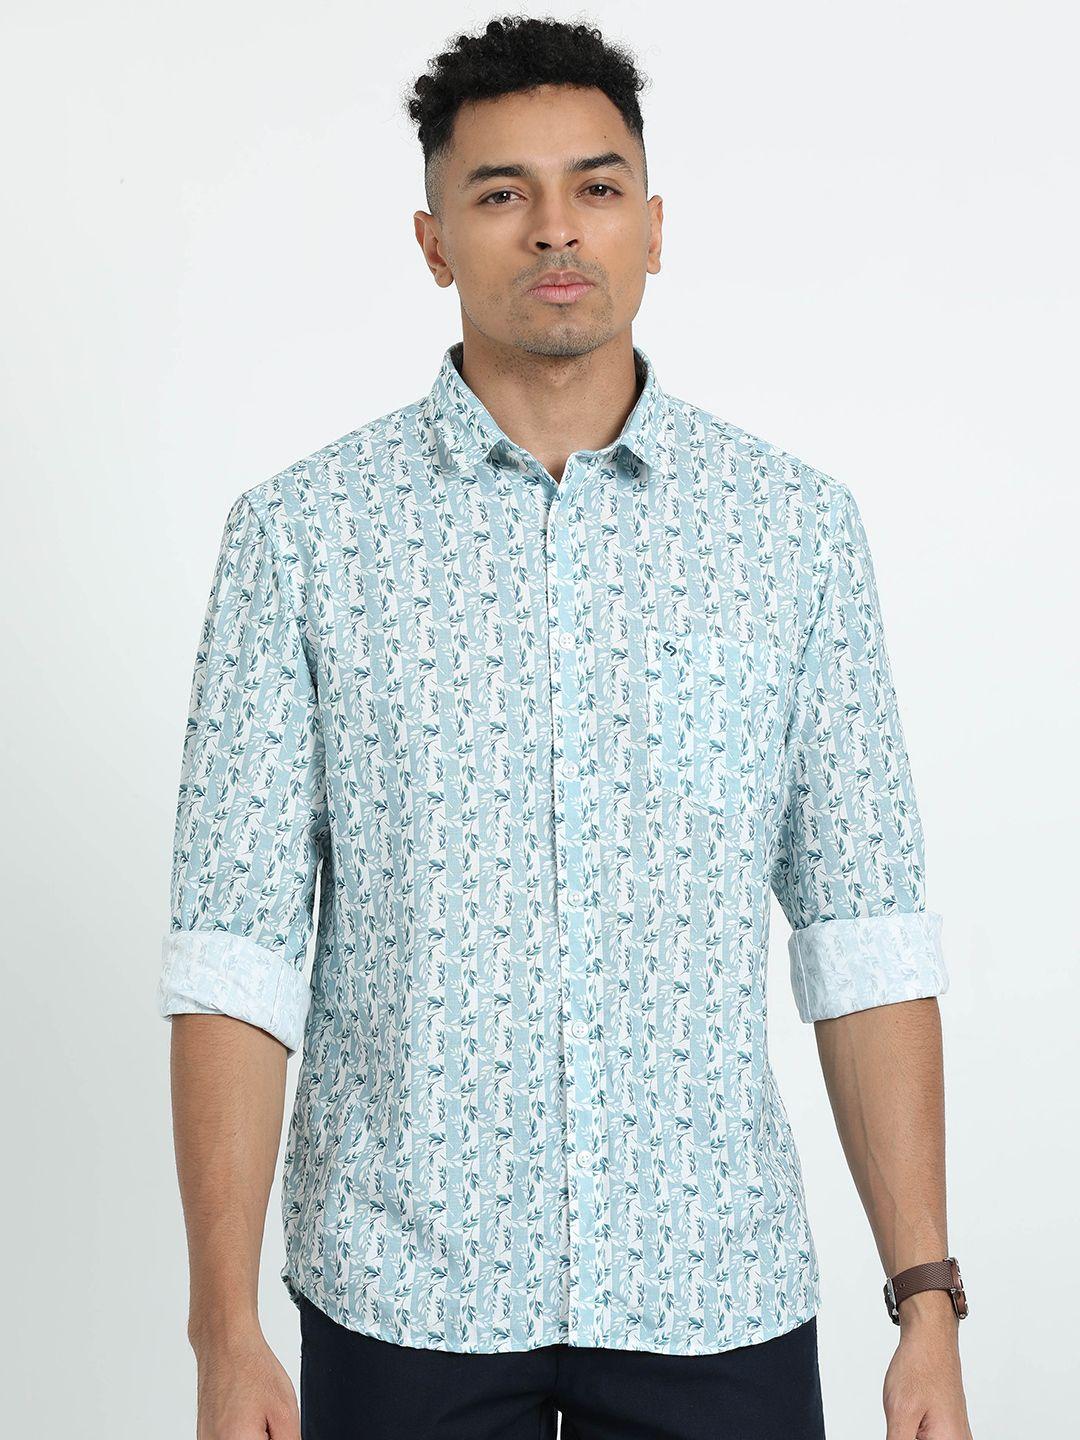 classic-polo-men-slim-fit-floral-opaque-printed-casual-shirt